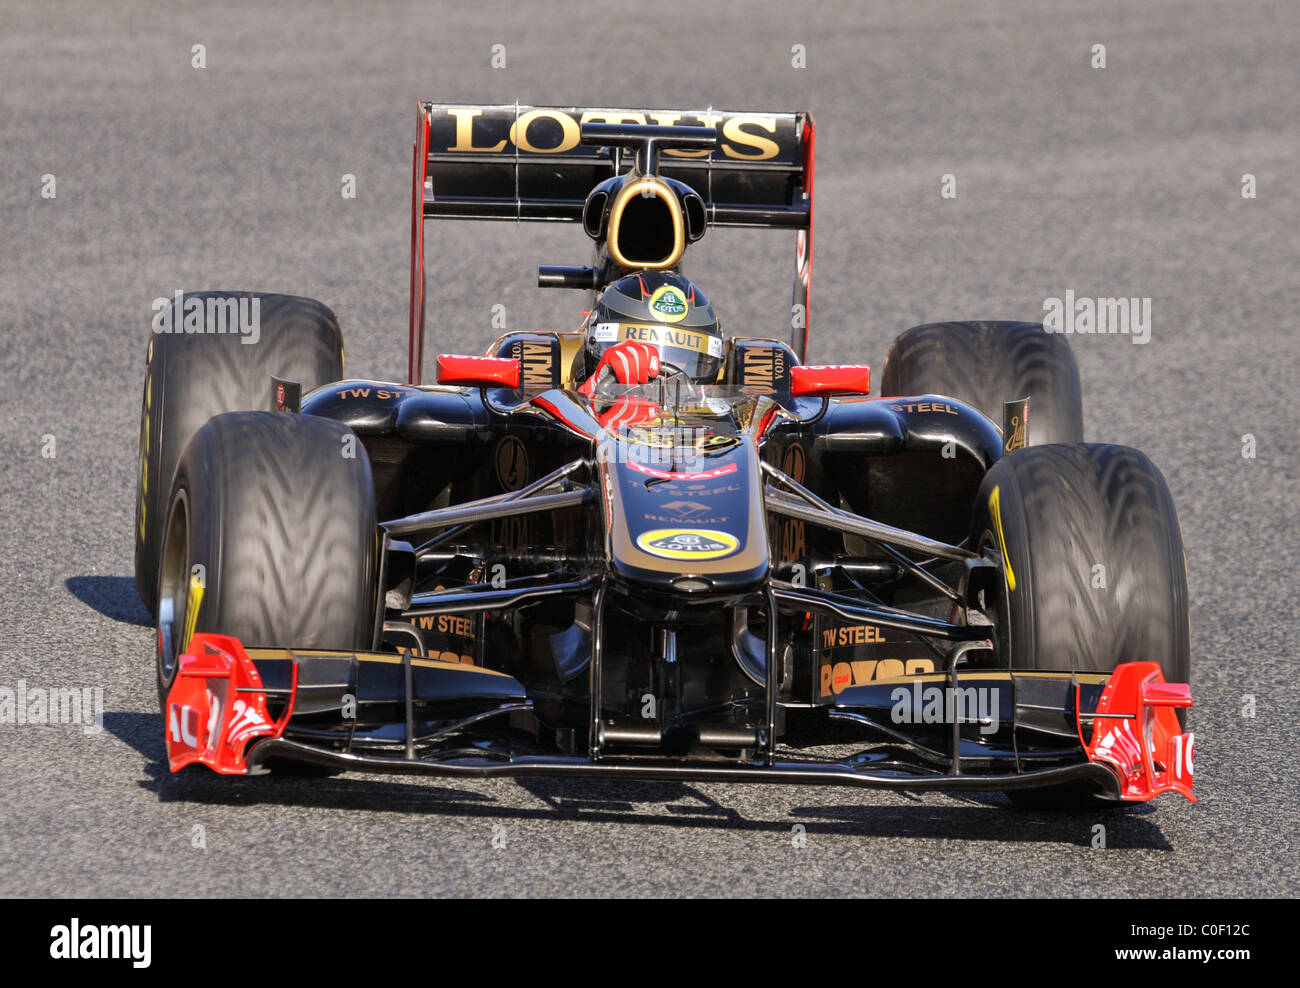 Nick Heidfeld (GER) in the Renault R31  Formula One race car In Feb. 2011 Stock Photo